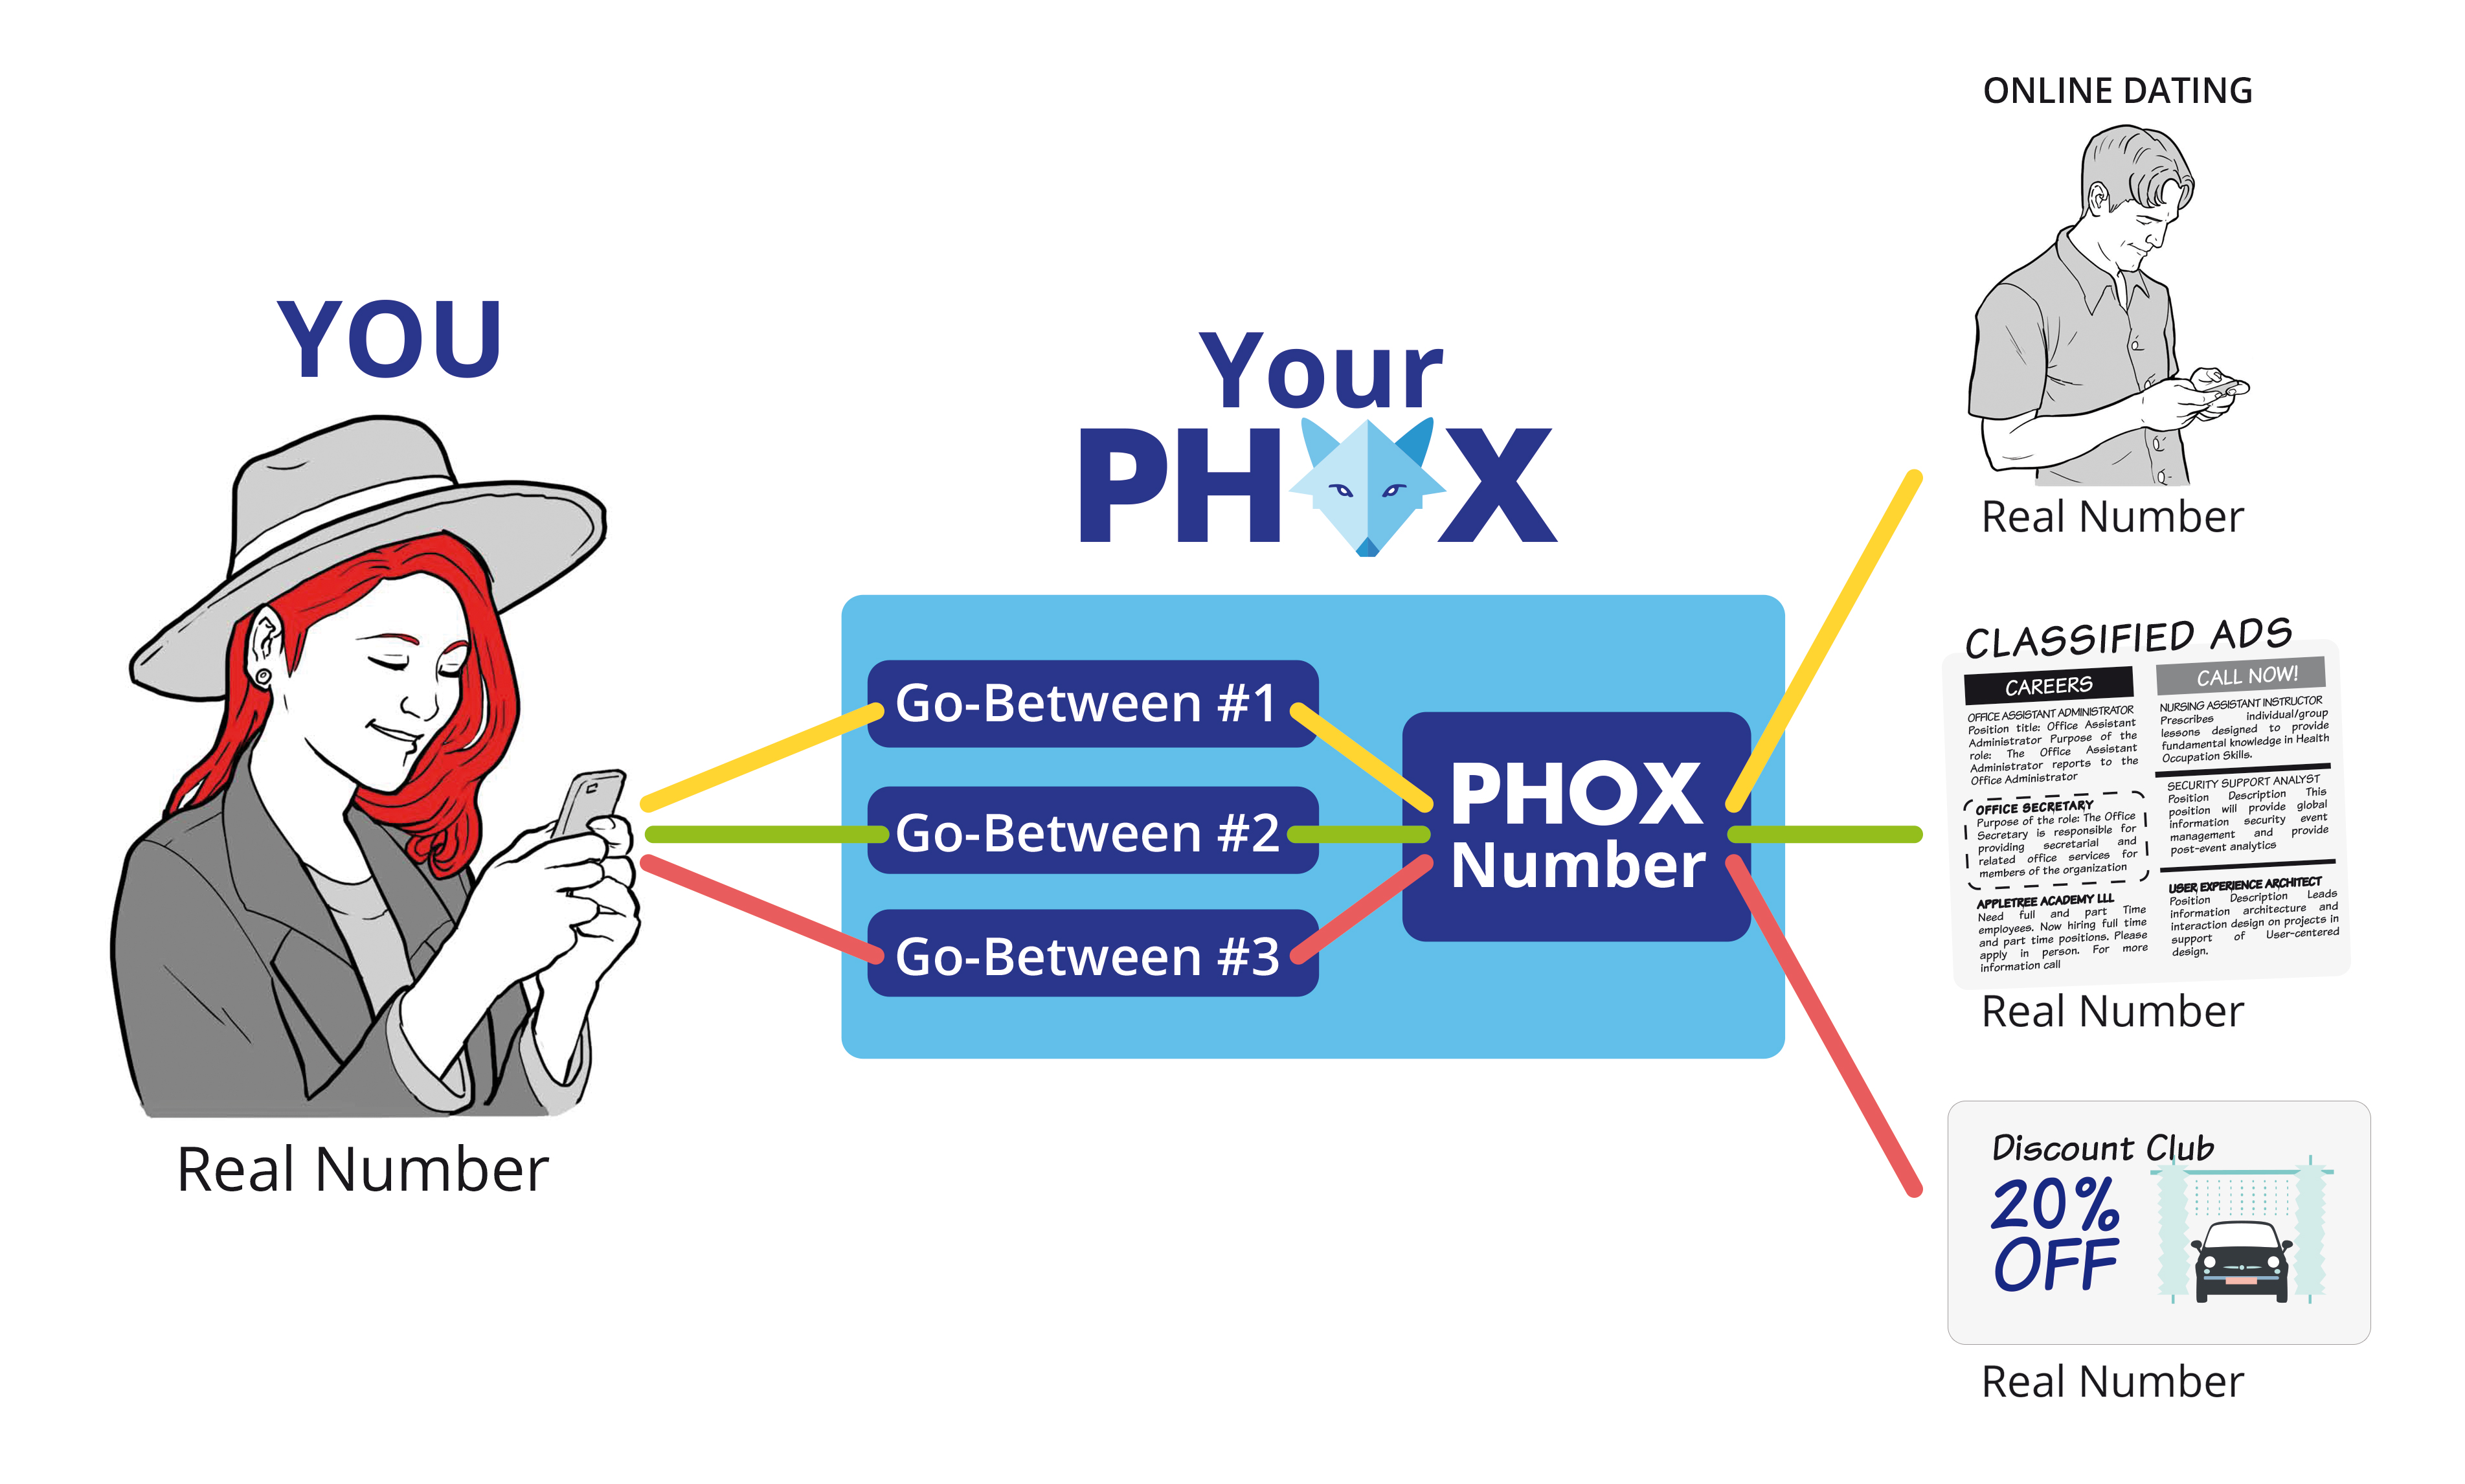 PHOX Private Texting Service